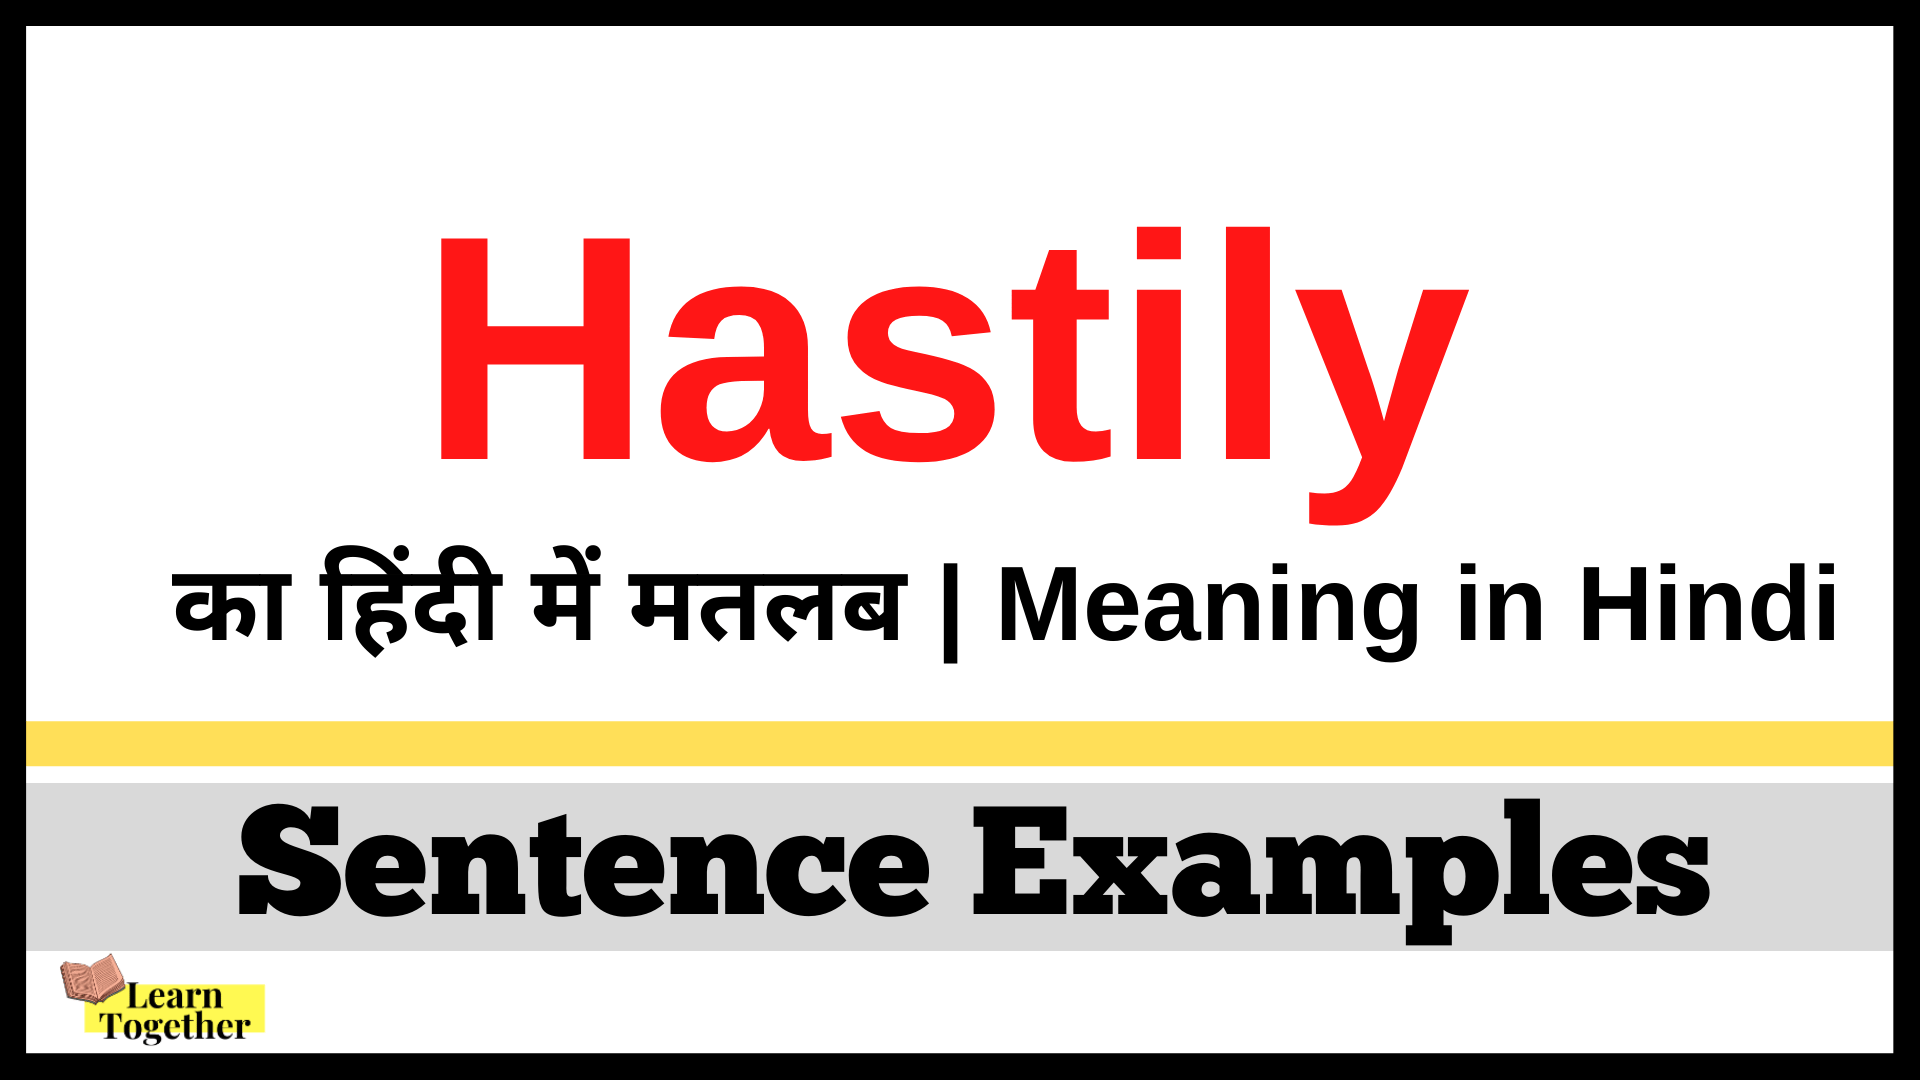 Hastily Meaning in Hindi.png